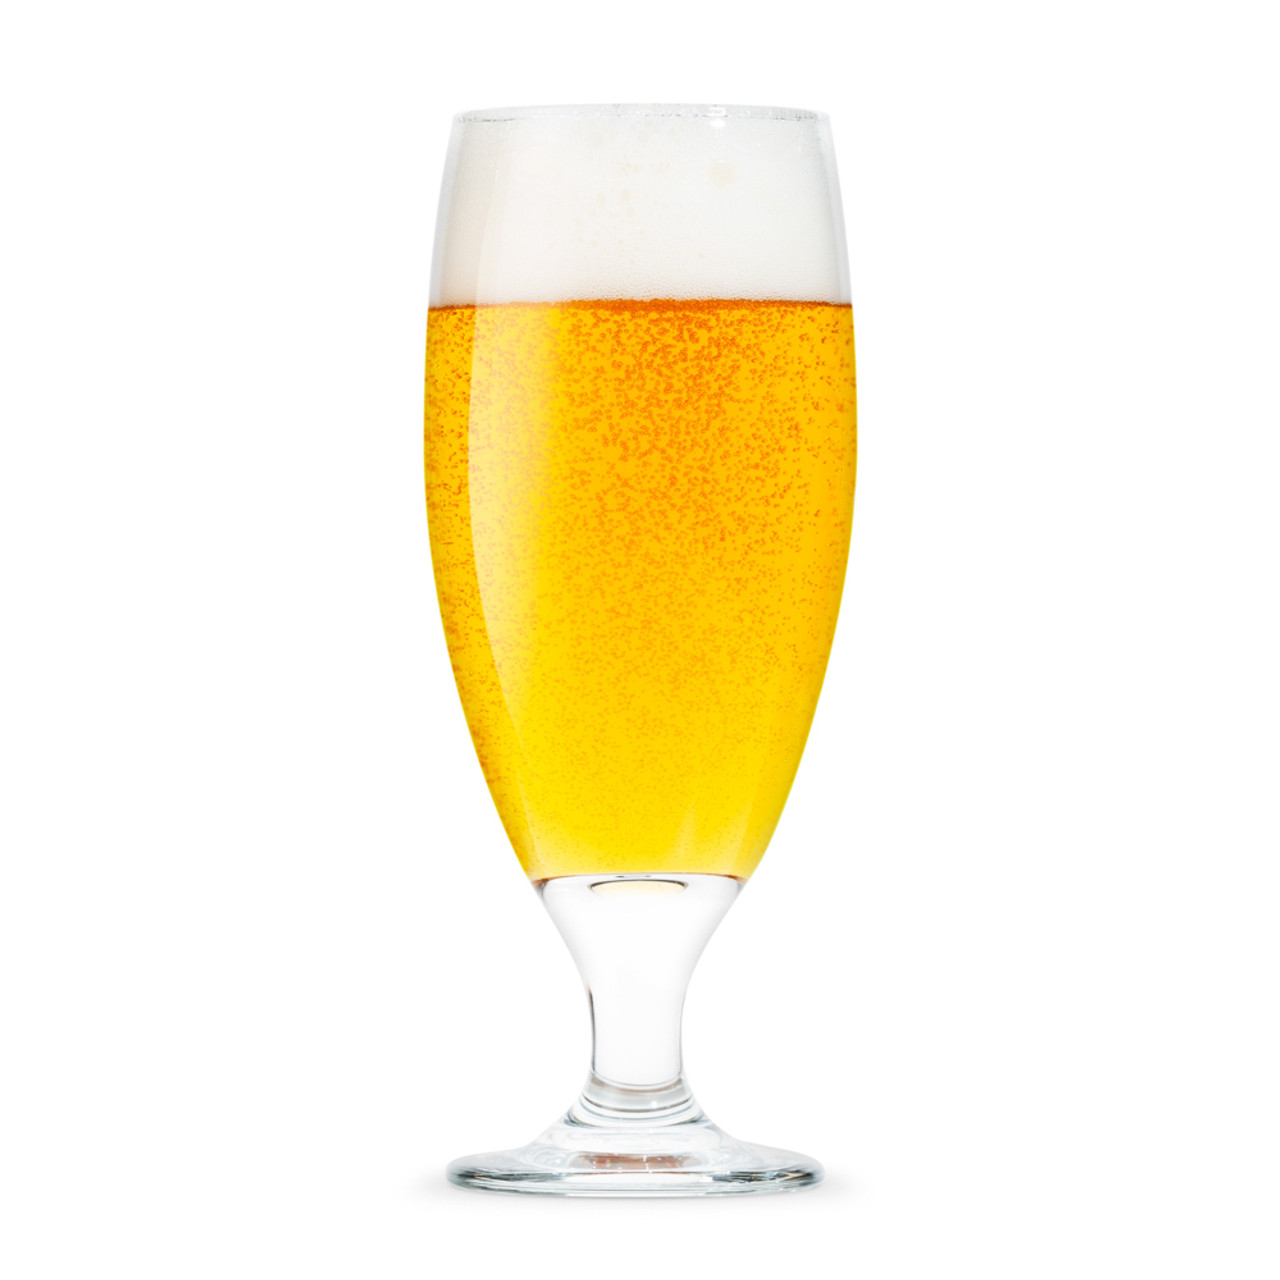 Glassware for lagers: why did my Stella Artois come in this kind of glass?  - Beer, Wine & Spirits Stack Exchange